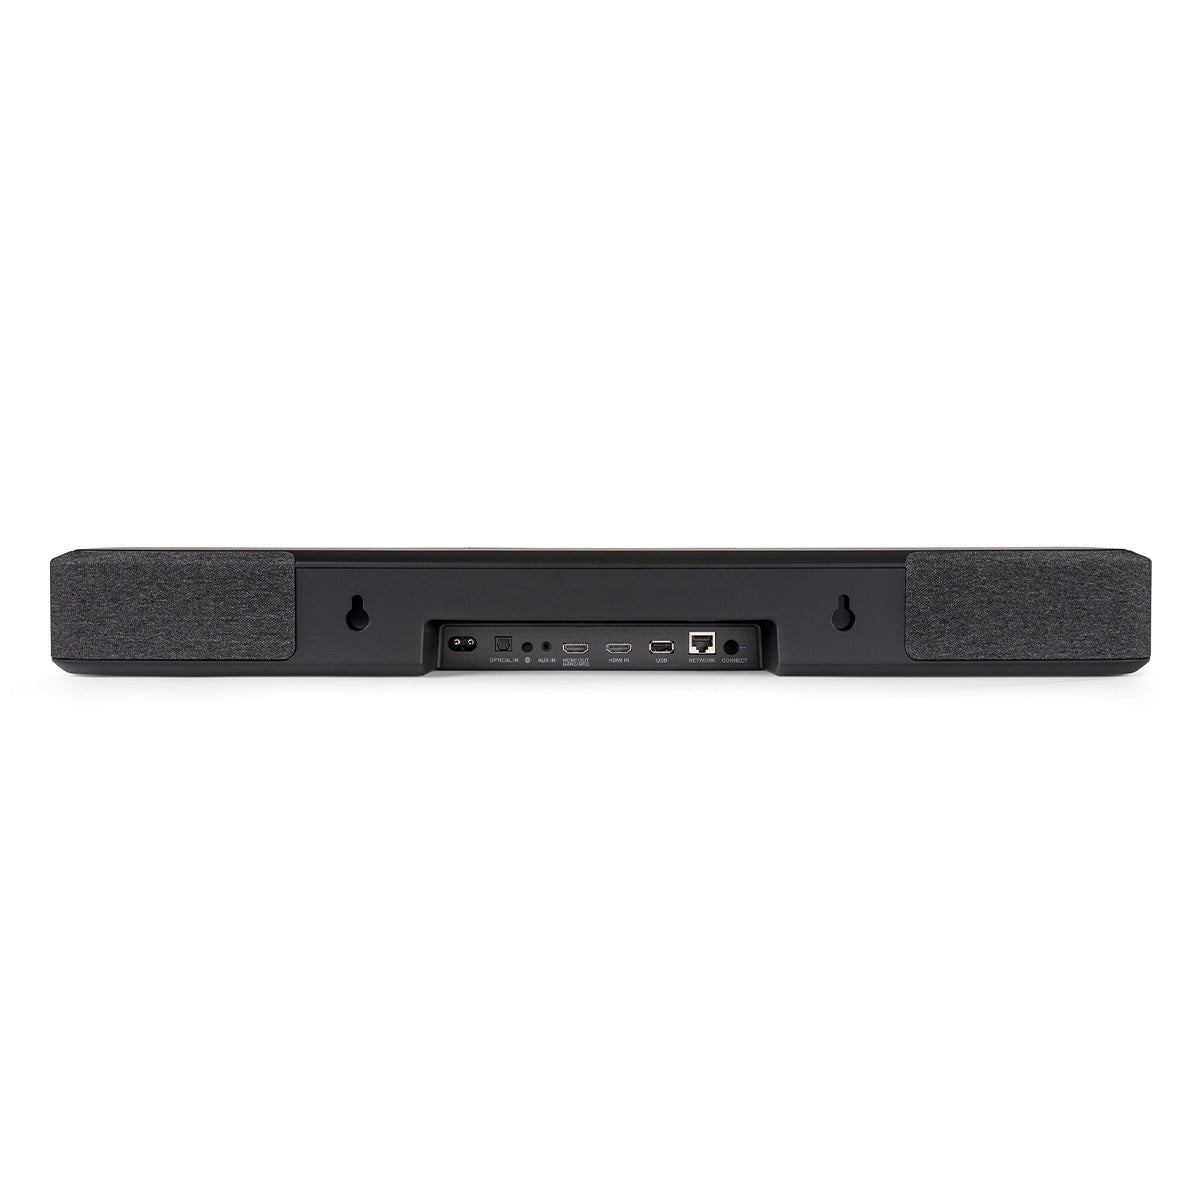 Denon Home Sound Bar 550 with Dolby Atmos and HEOS Built-in and Denon Home Wireless 8" Subwoofer with HEOS (Factory Certified Refurbished)